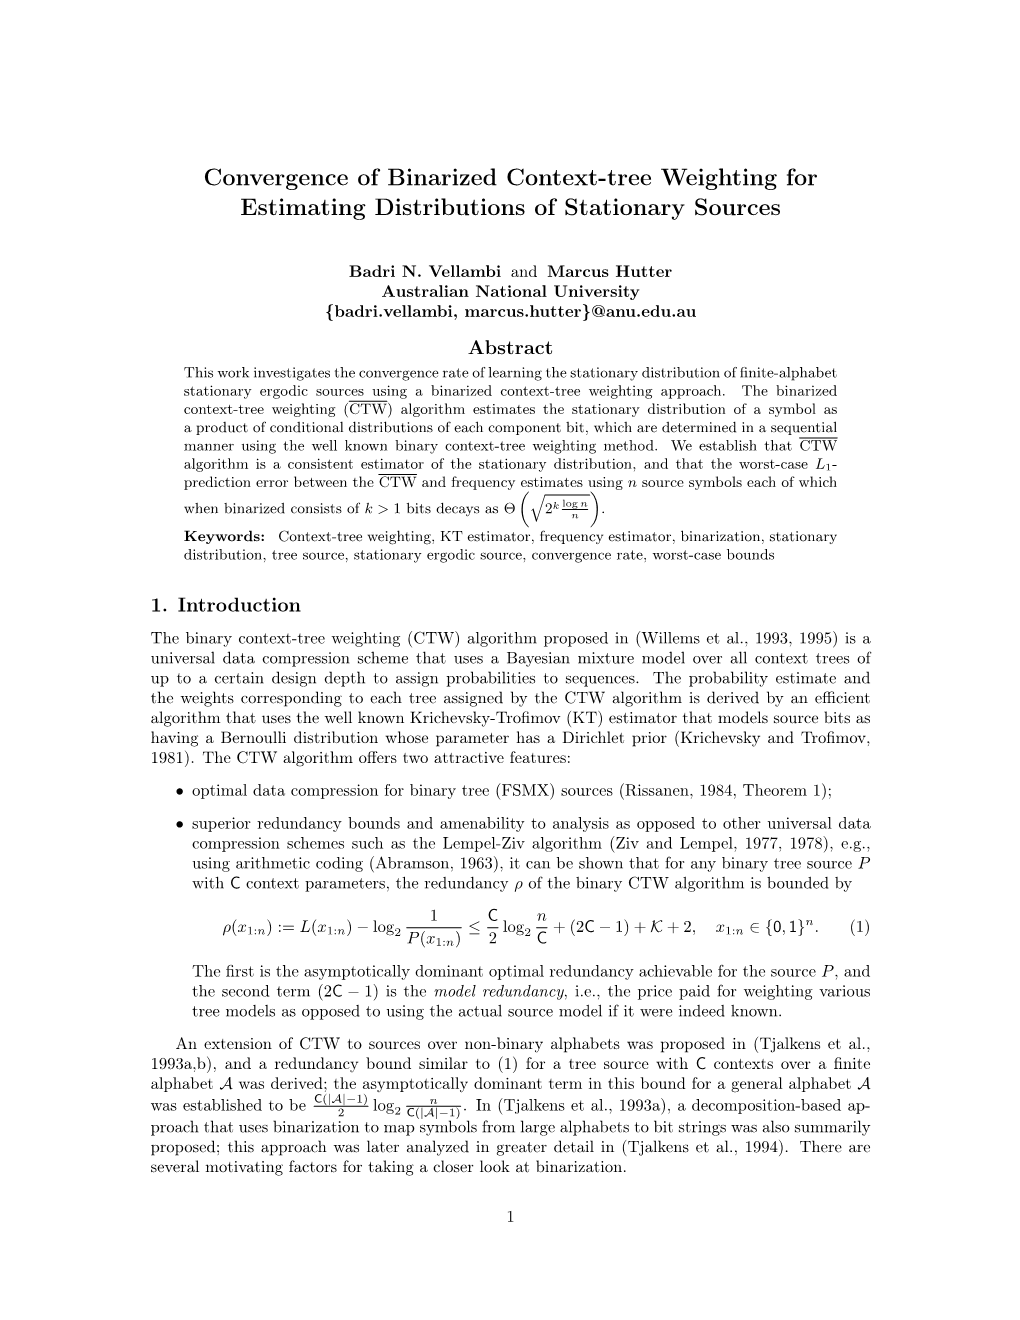 Convergence of Binarized Context-Tree Weighting for Estimating Distributions of Stationary Sources